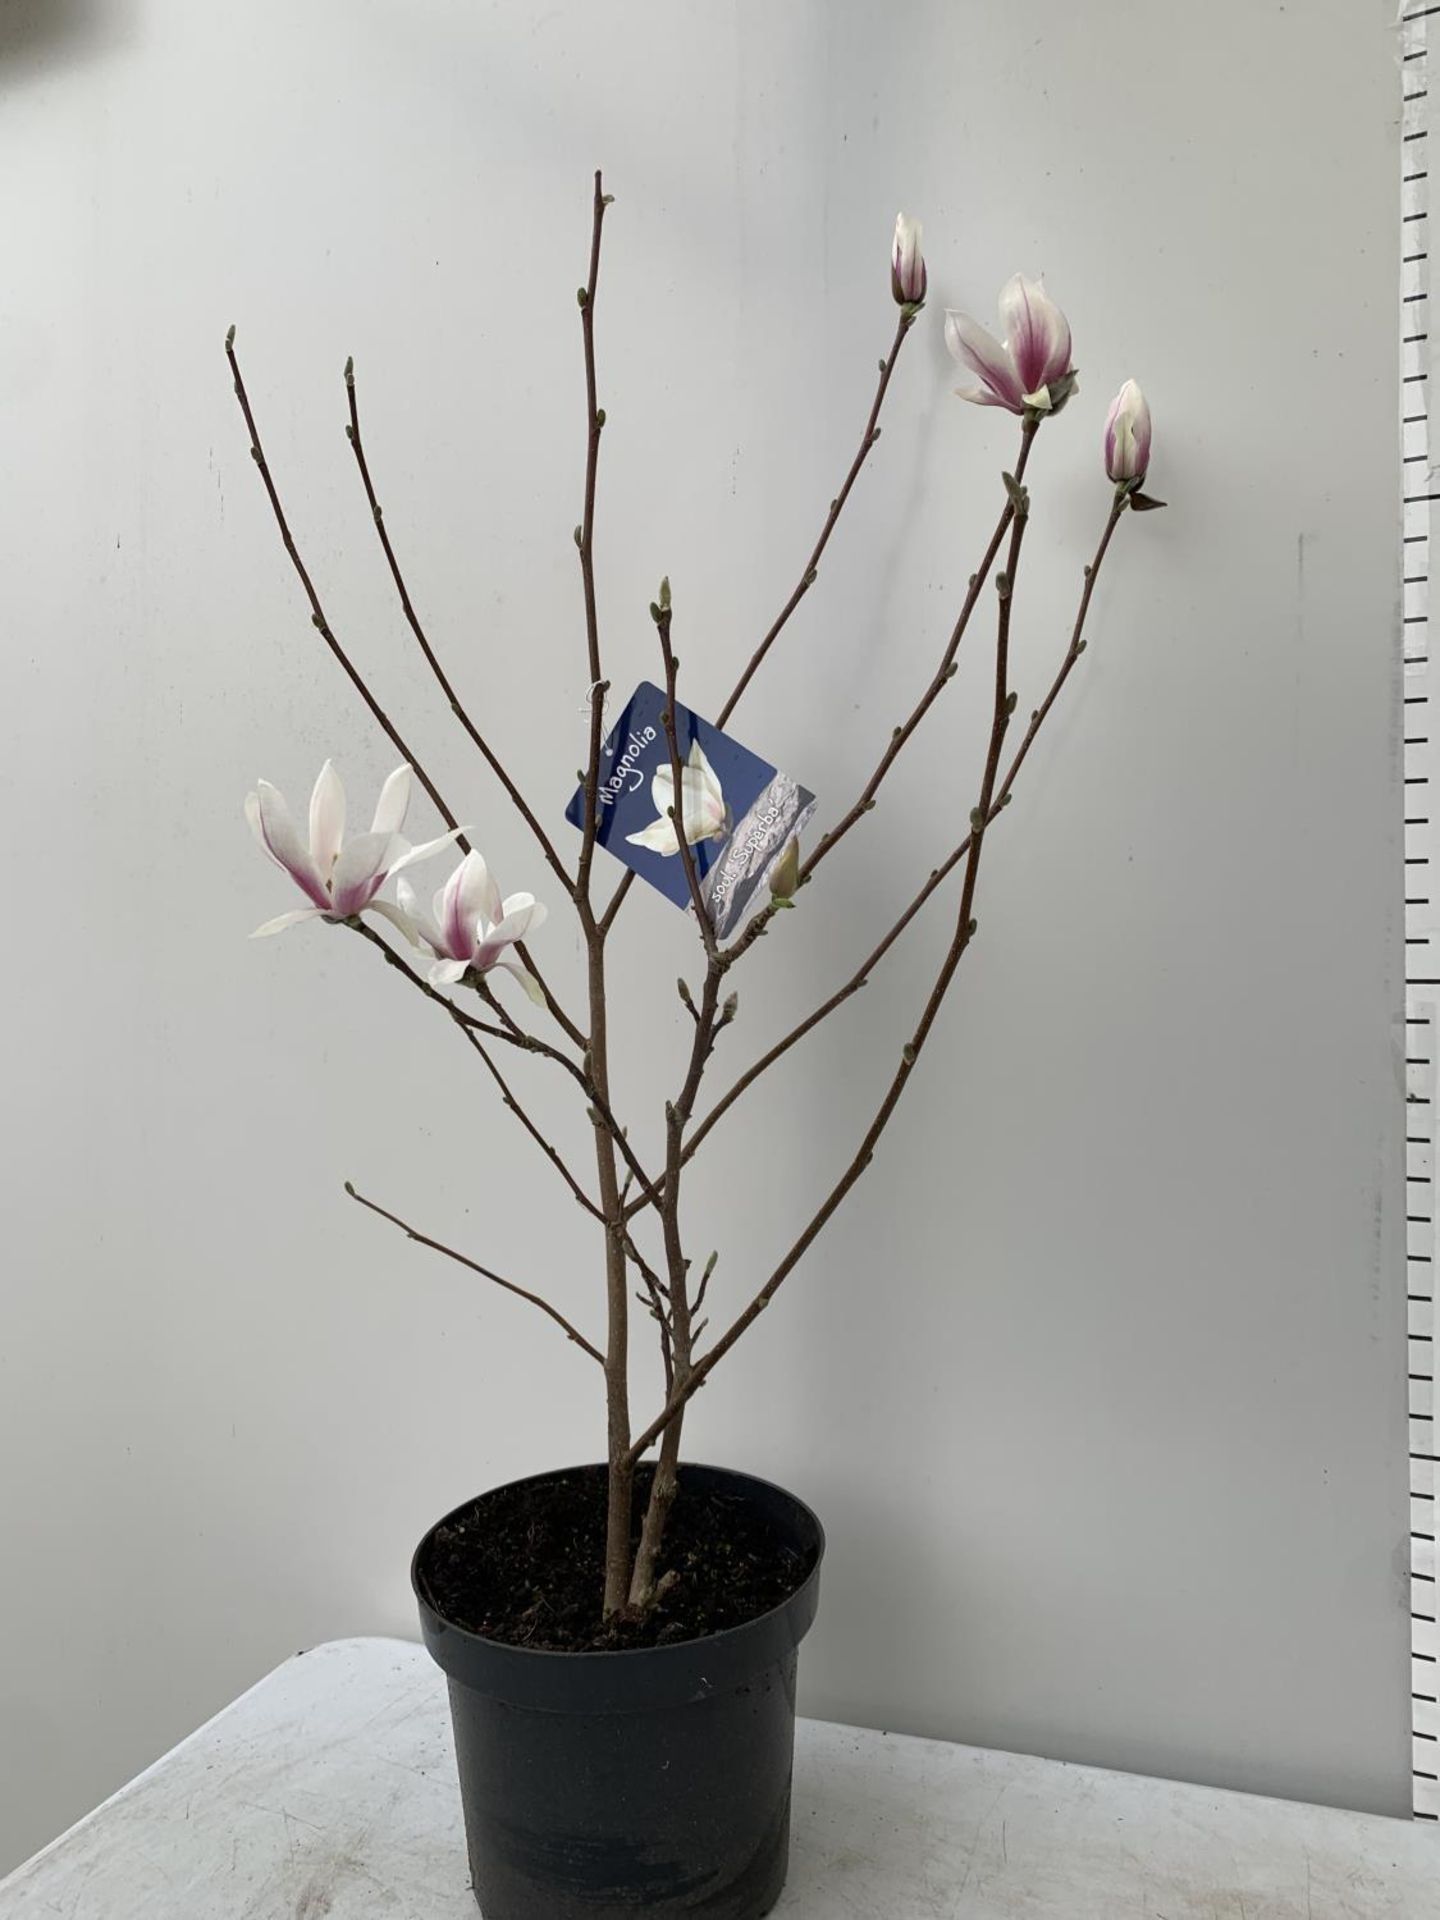 ONE MAGNOLIA SOULANGEANA 'SUPERBA' APPROX 120CM IN HEIGHT IN A 7 LTR POT PLUS VAT - Image 4 of 14